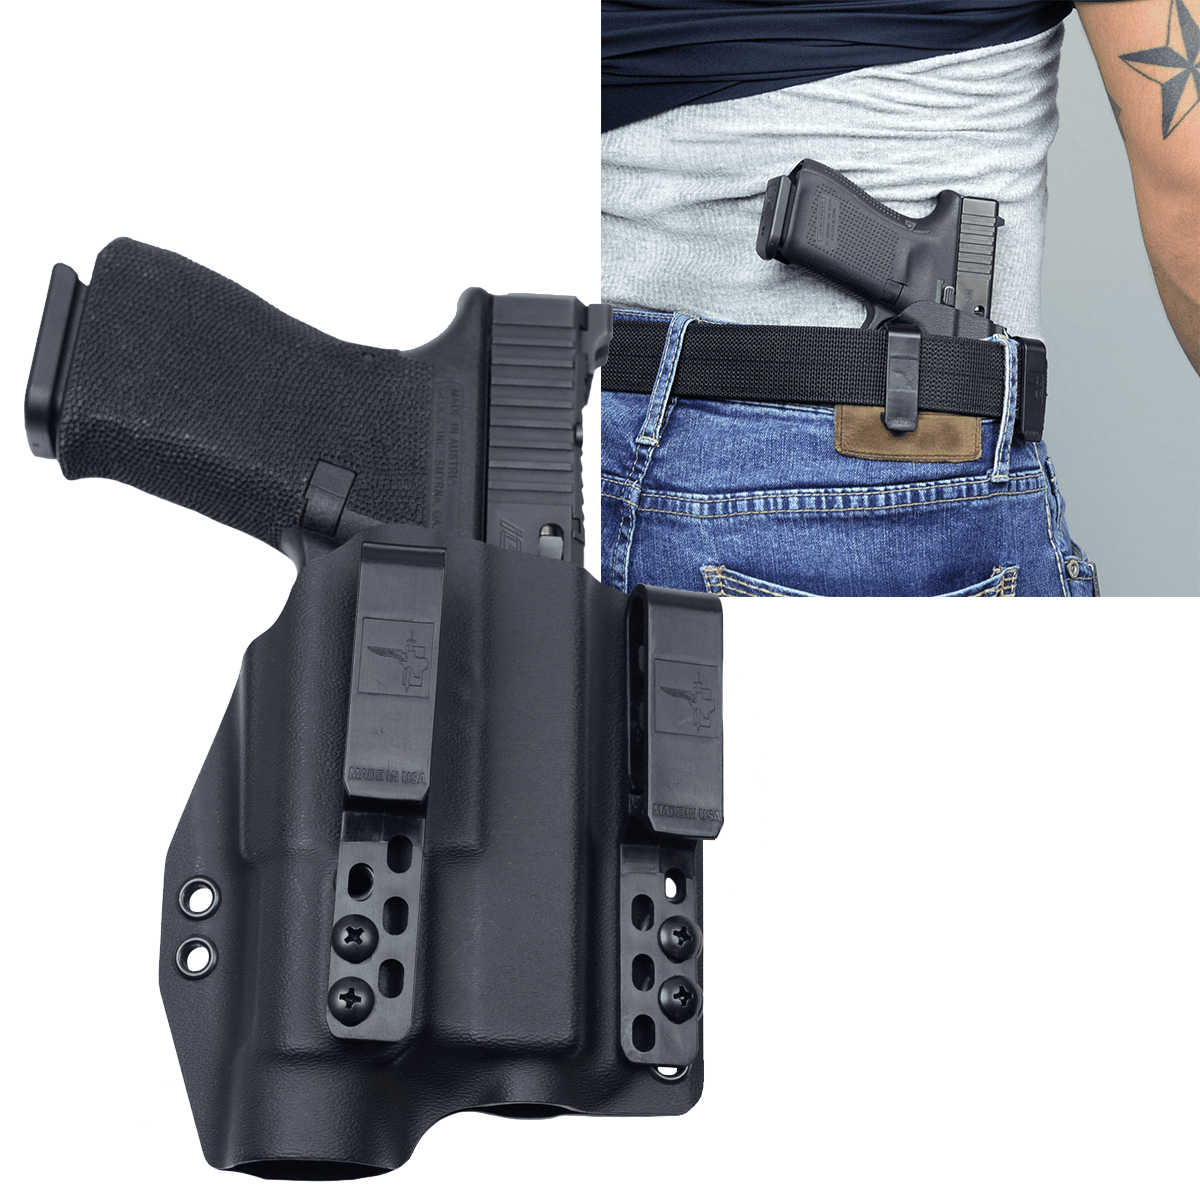 IWB Holster For Glock 17/22/31 With TLR1 Adjustable Clip Fits 19/23/32 Also